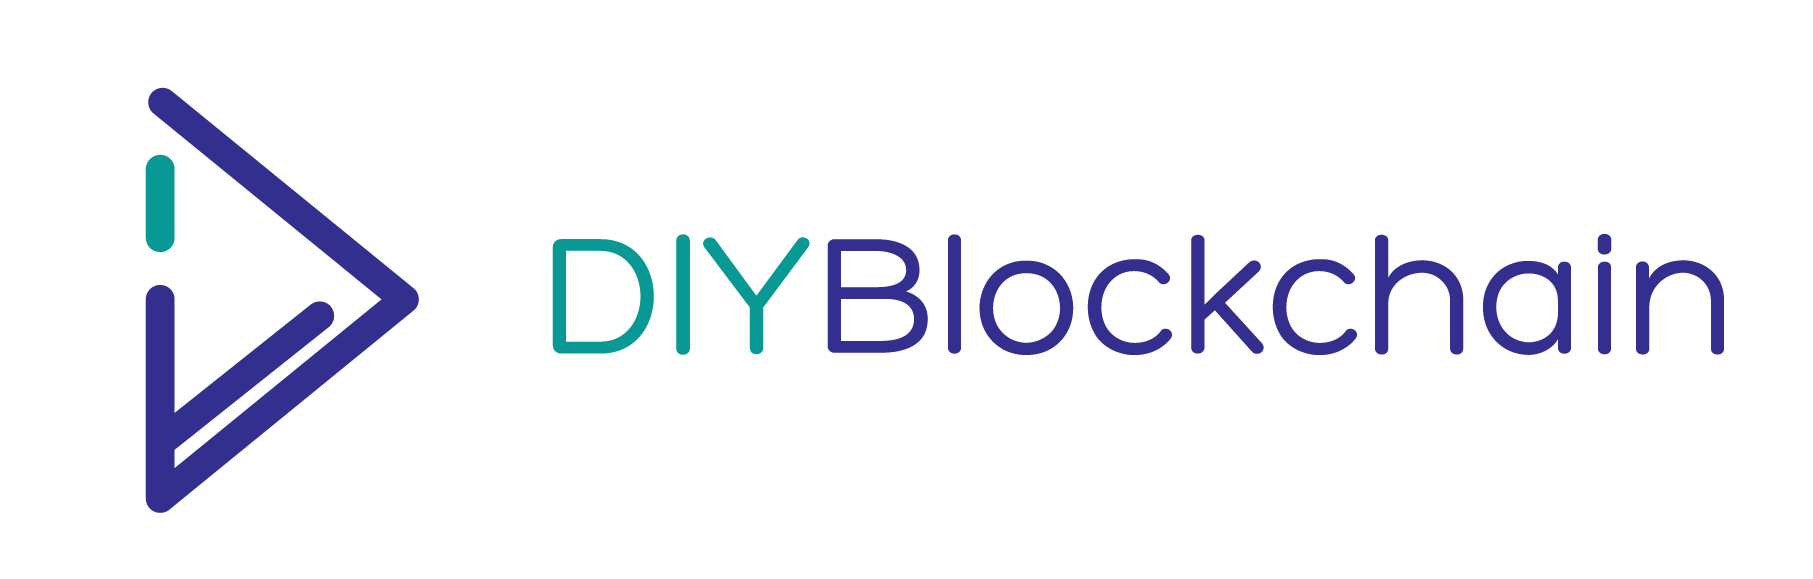 DIYBlockchain profile on Qualified.One